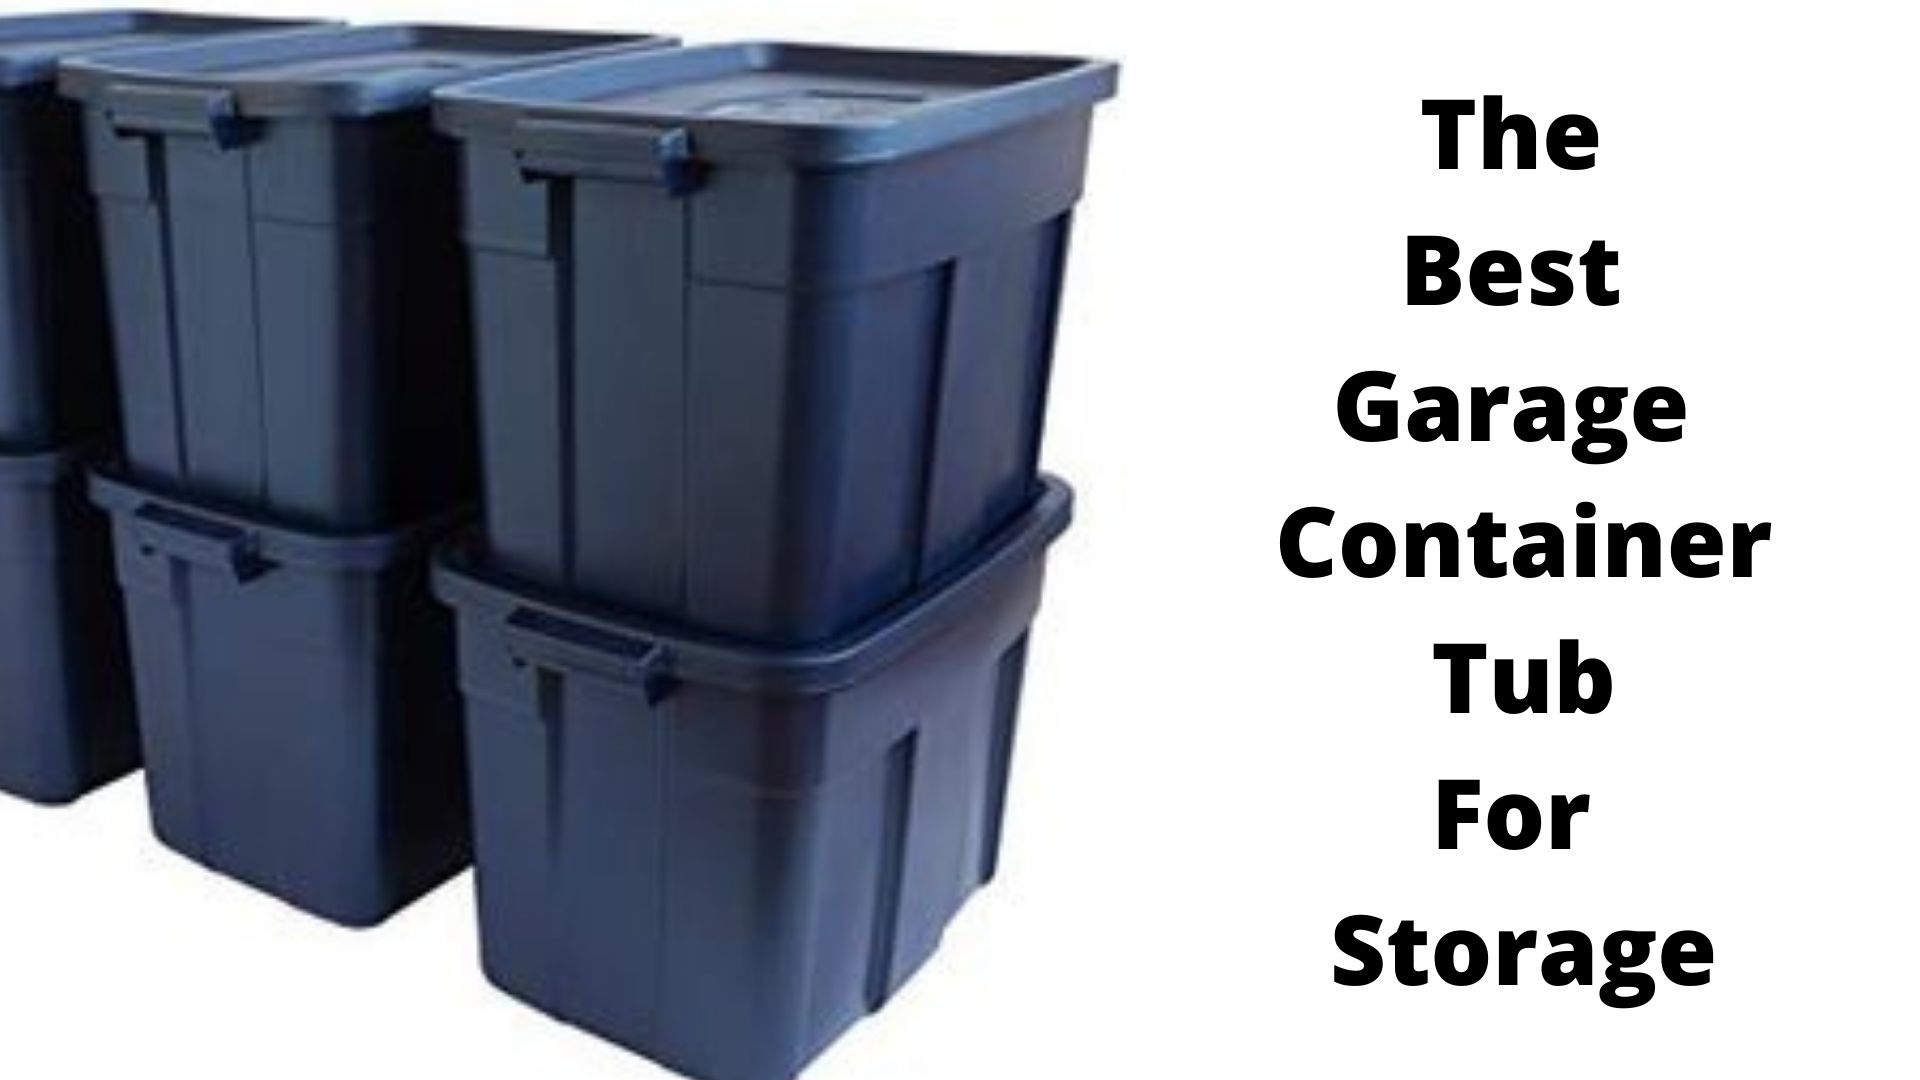 6 The Best Garage Container Tub For Storage – Review 2021